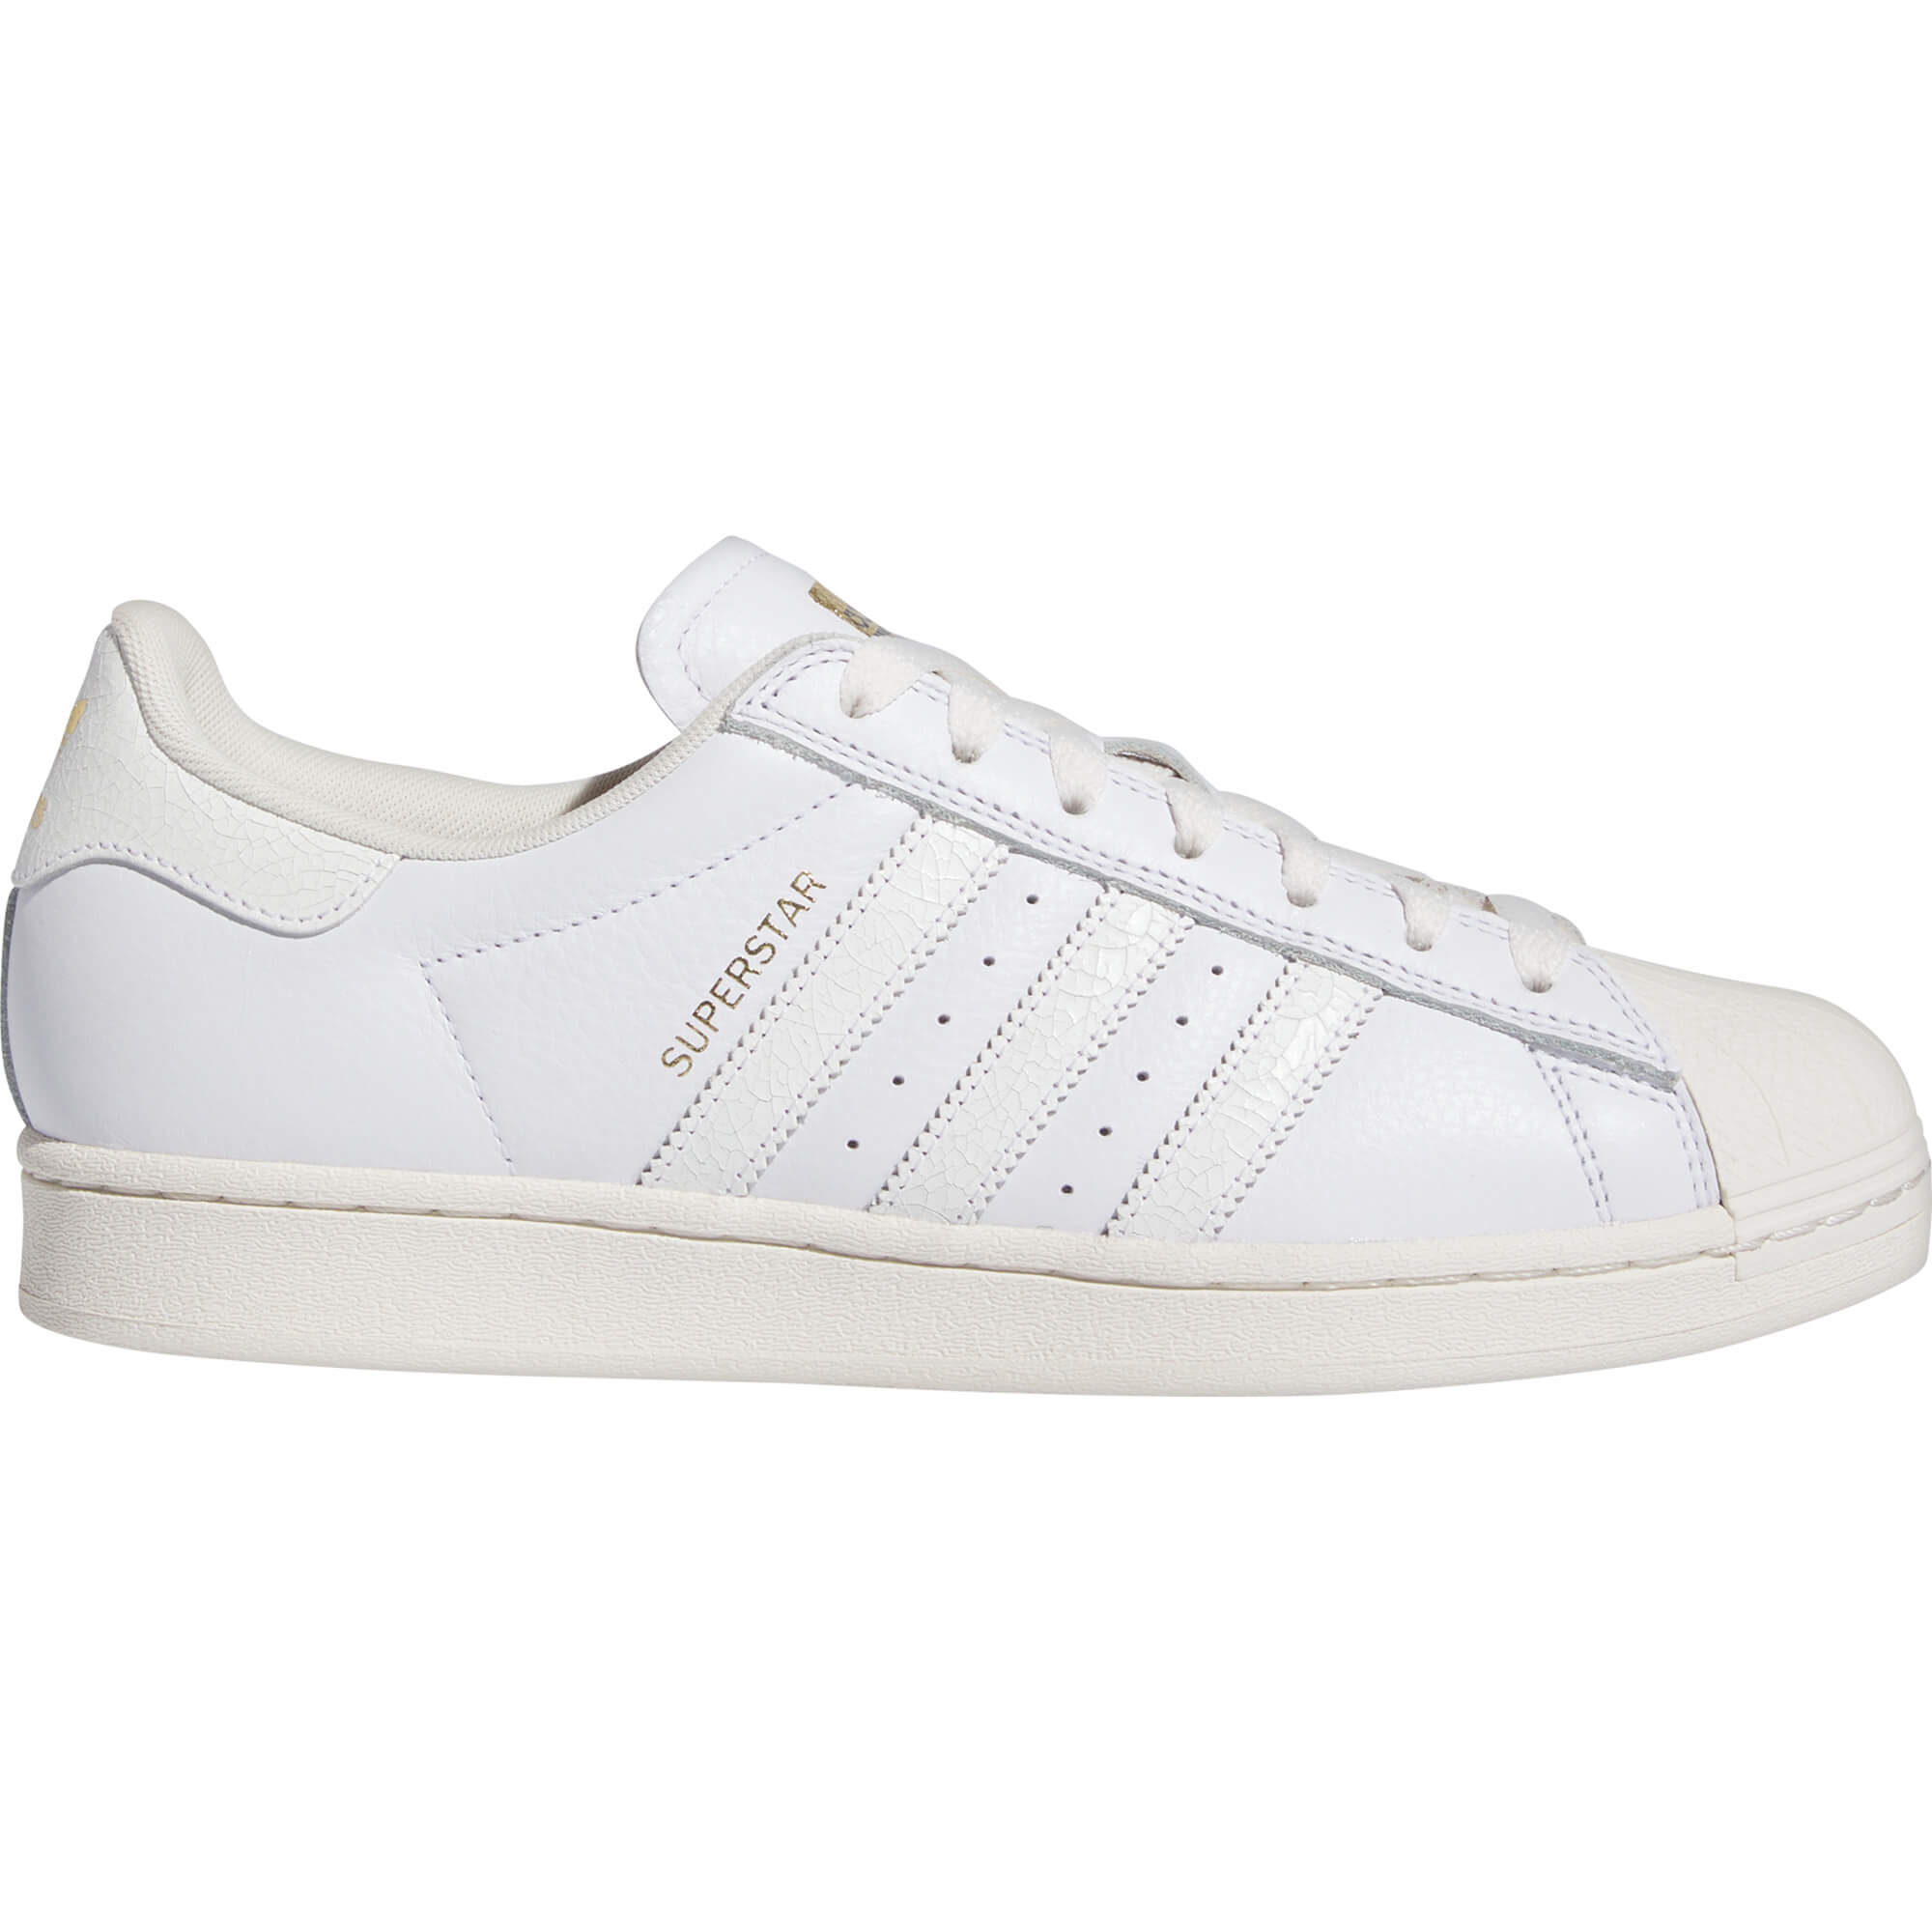 Adidas Superstar ADV Trainers/Skate Shoes